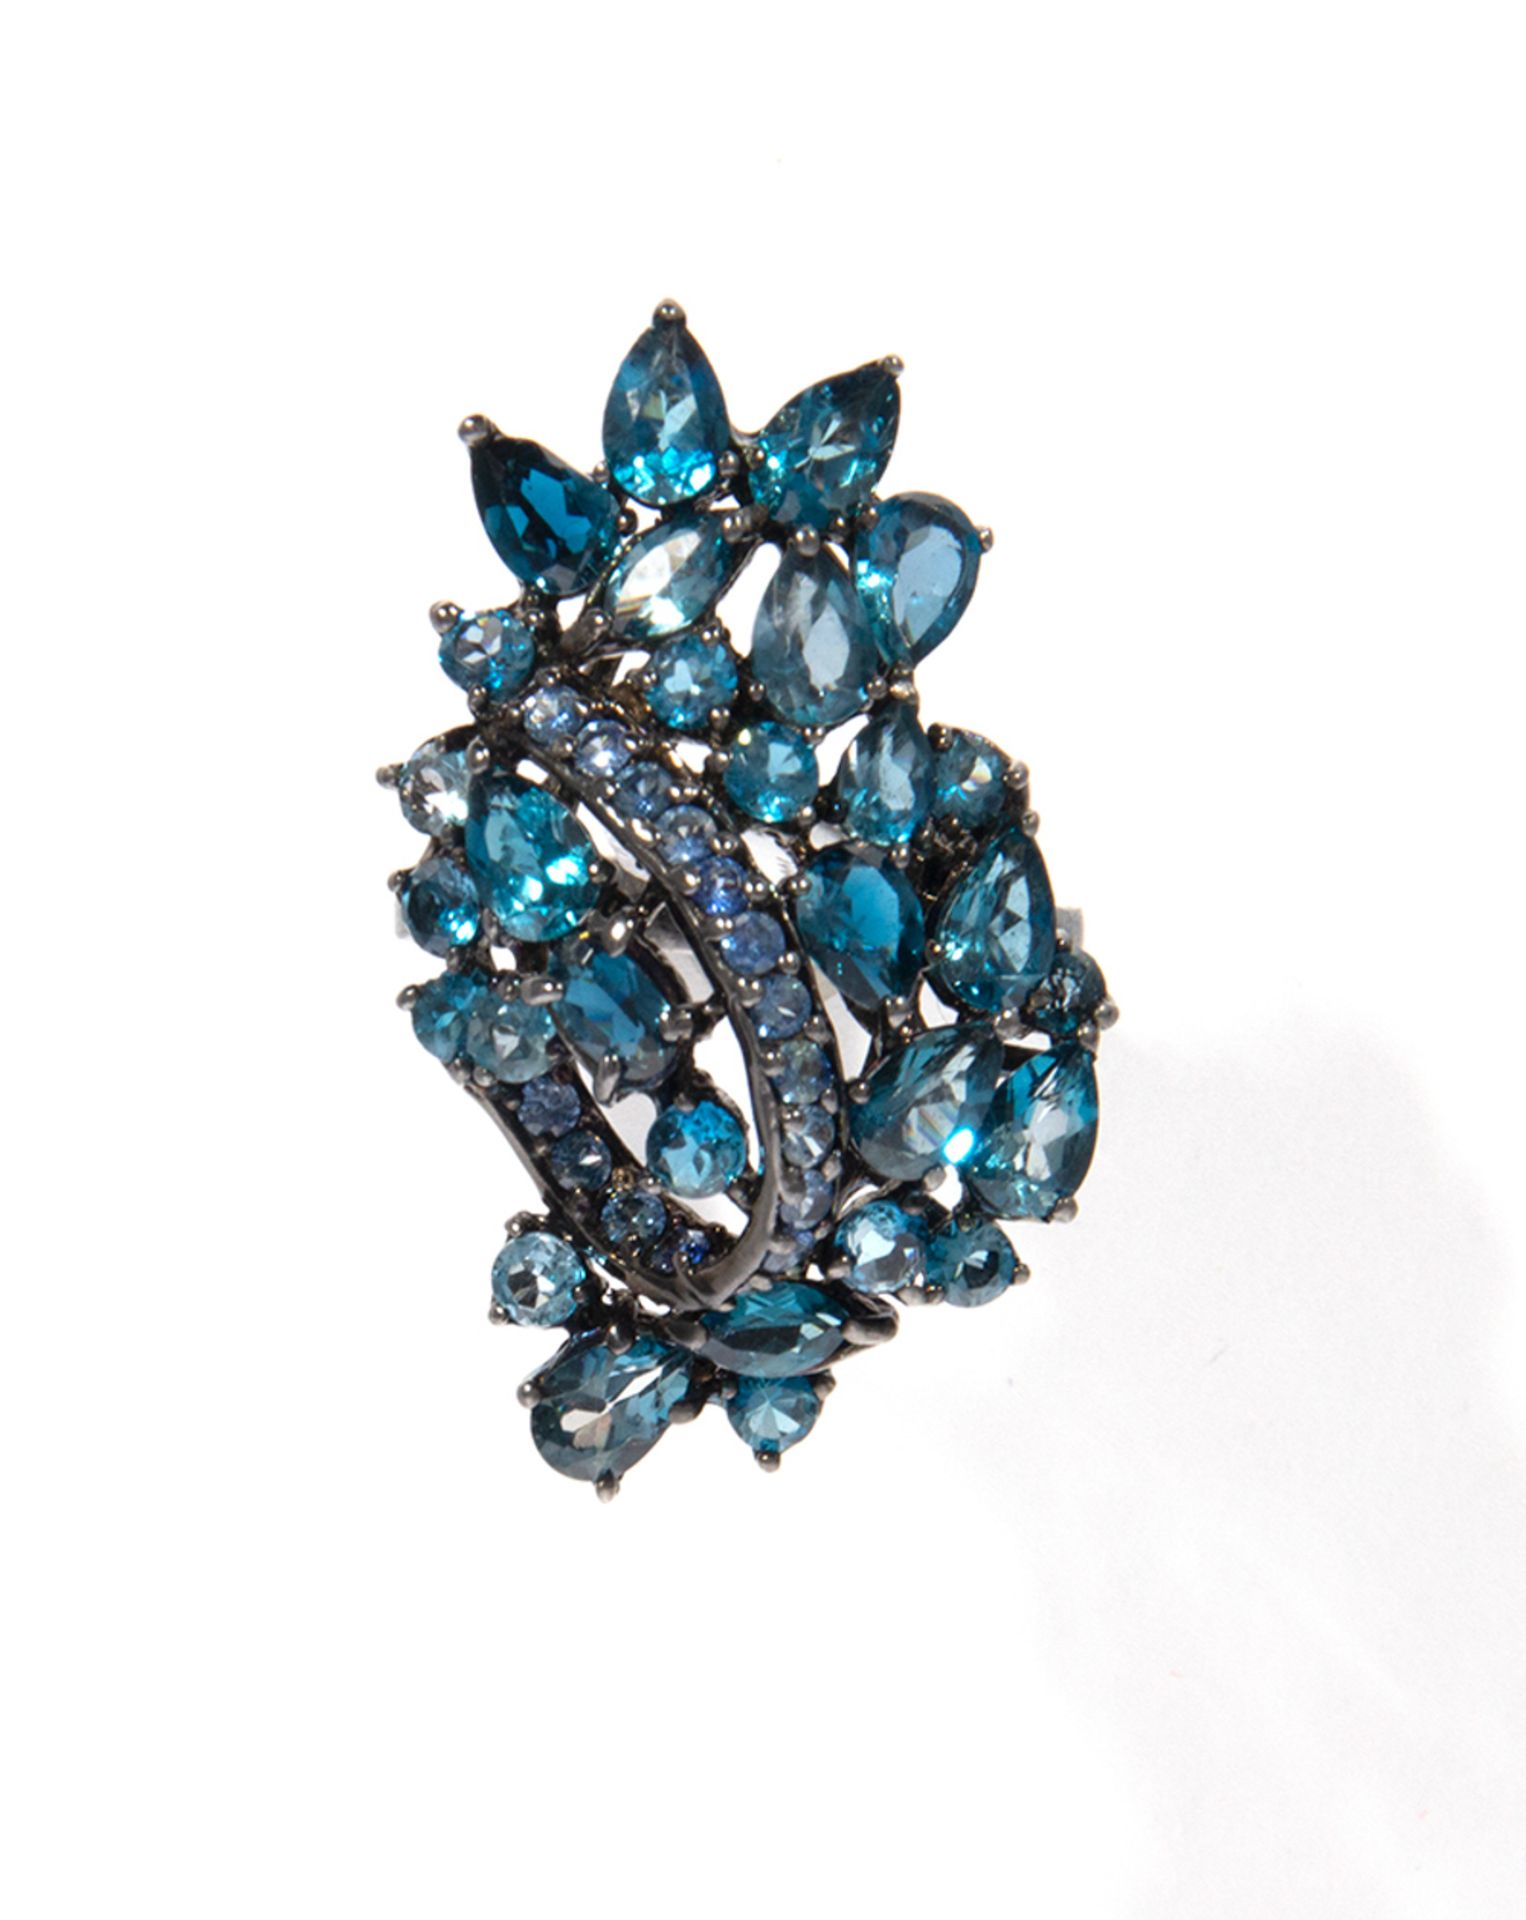 Ring in blued silver, sapphires and blue topaz, round and knob cuts.